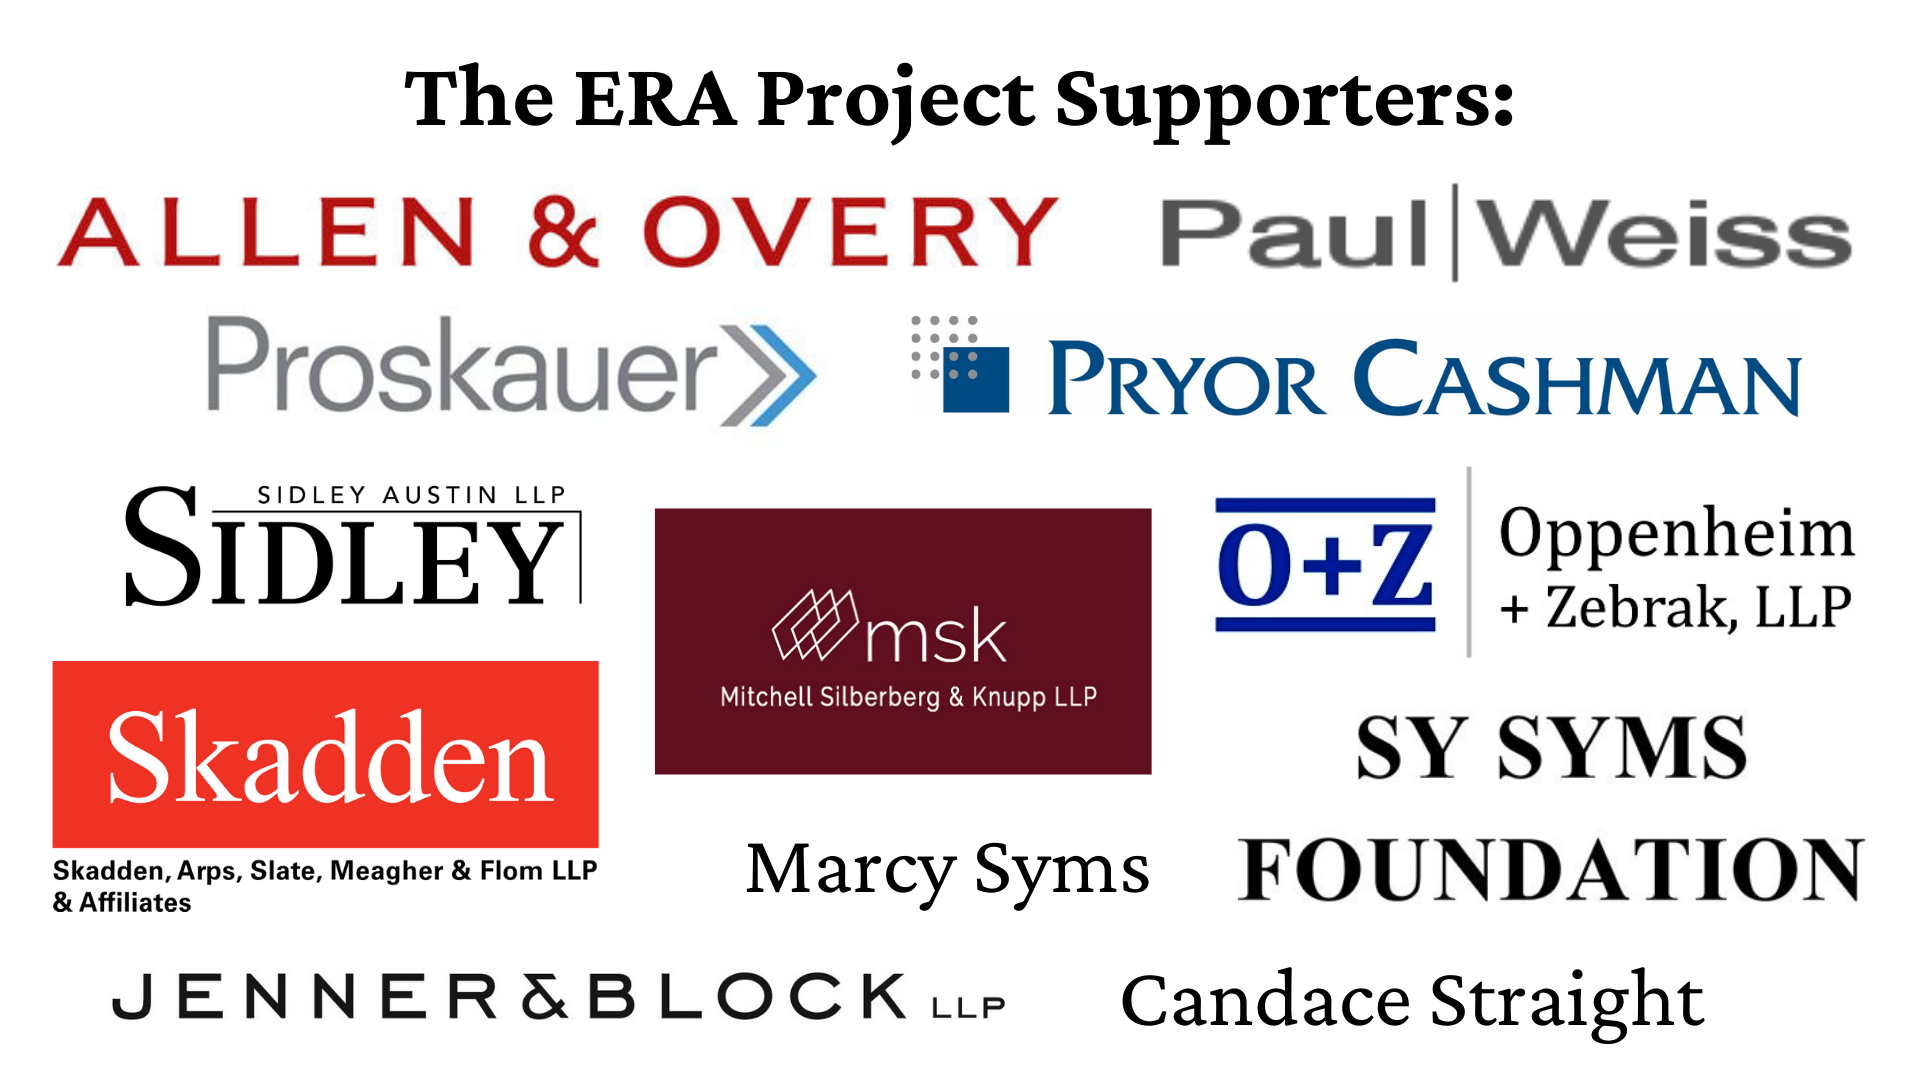 Logos and names of law firms, foundations and individuals who support the ERA Project